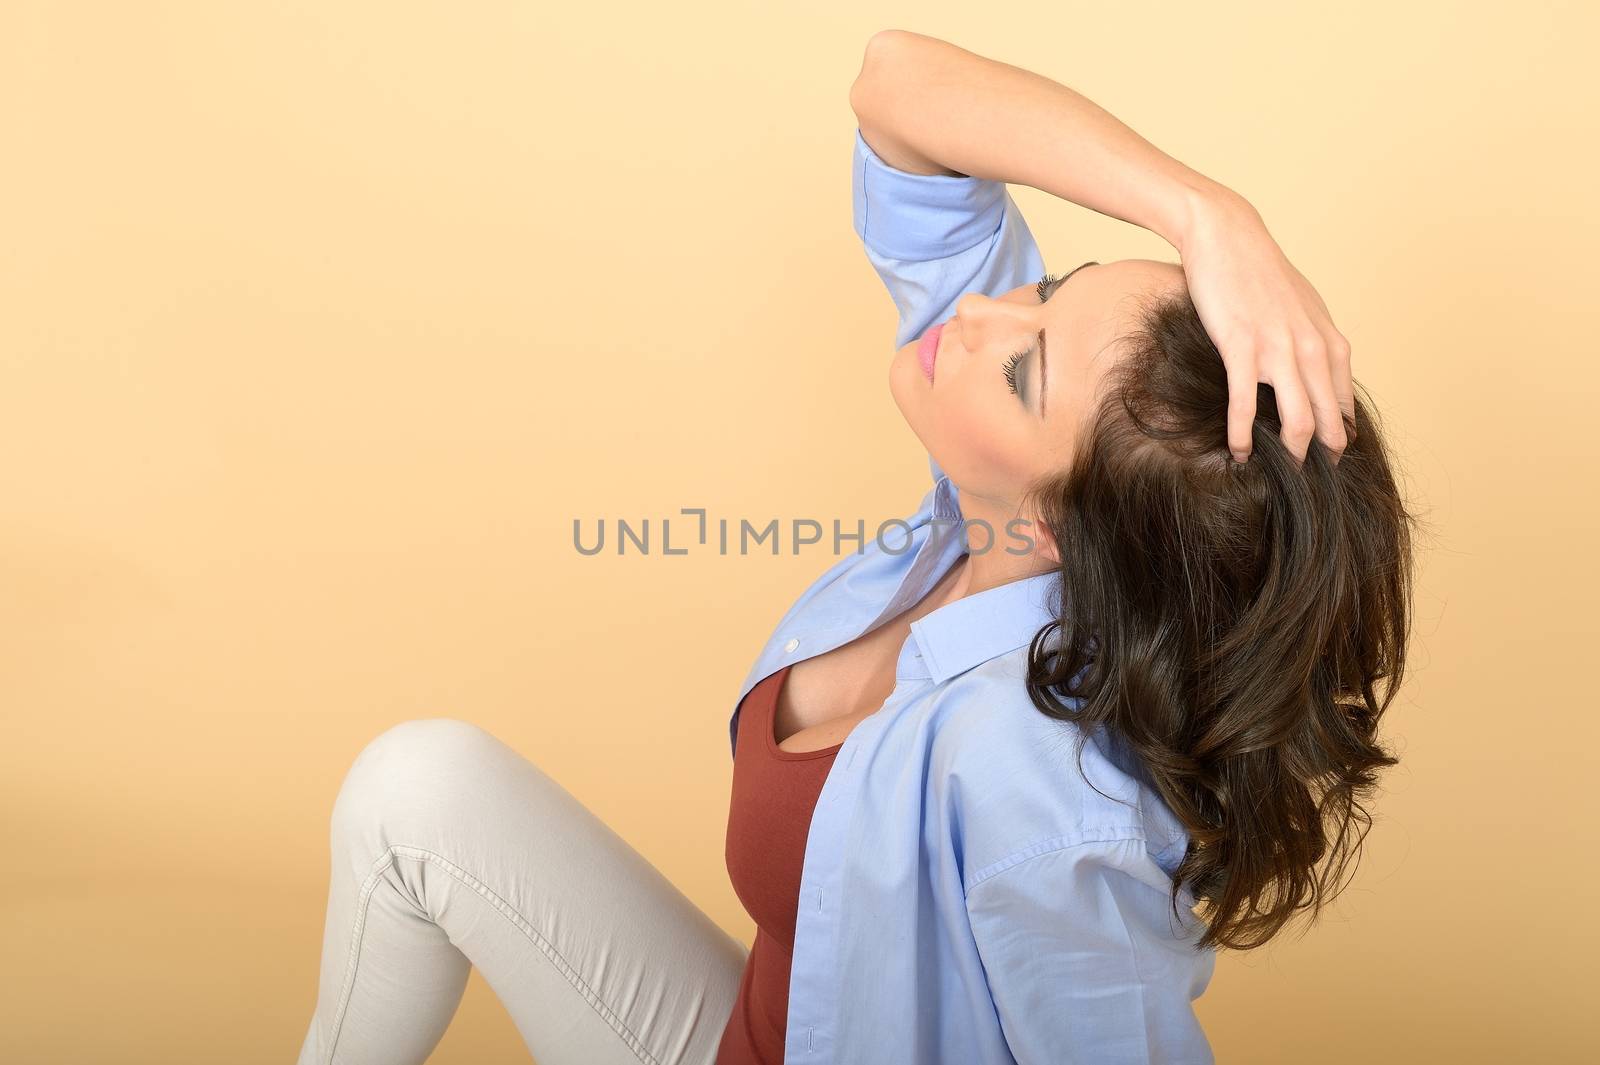 Attractive Young Beautiful Woman Sitting on the Floor Wearing a  by Whiteboxmedia